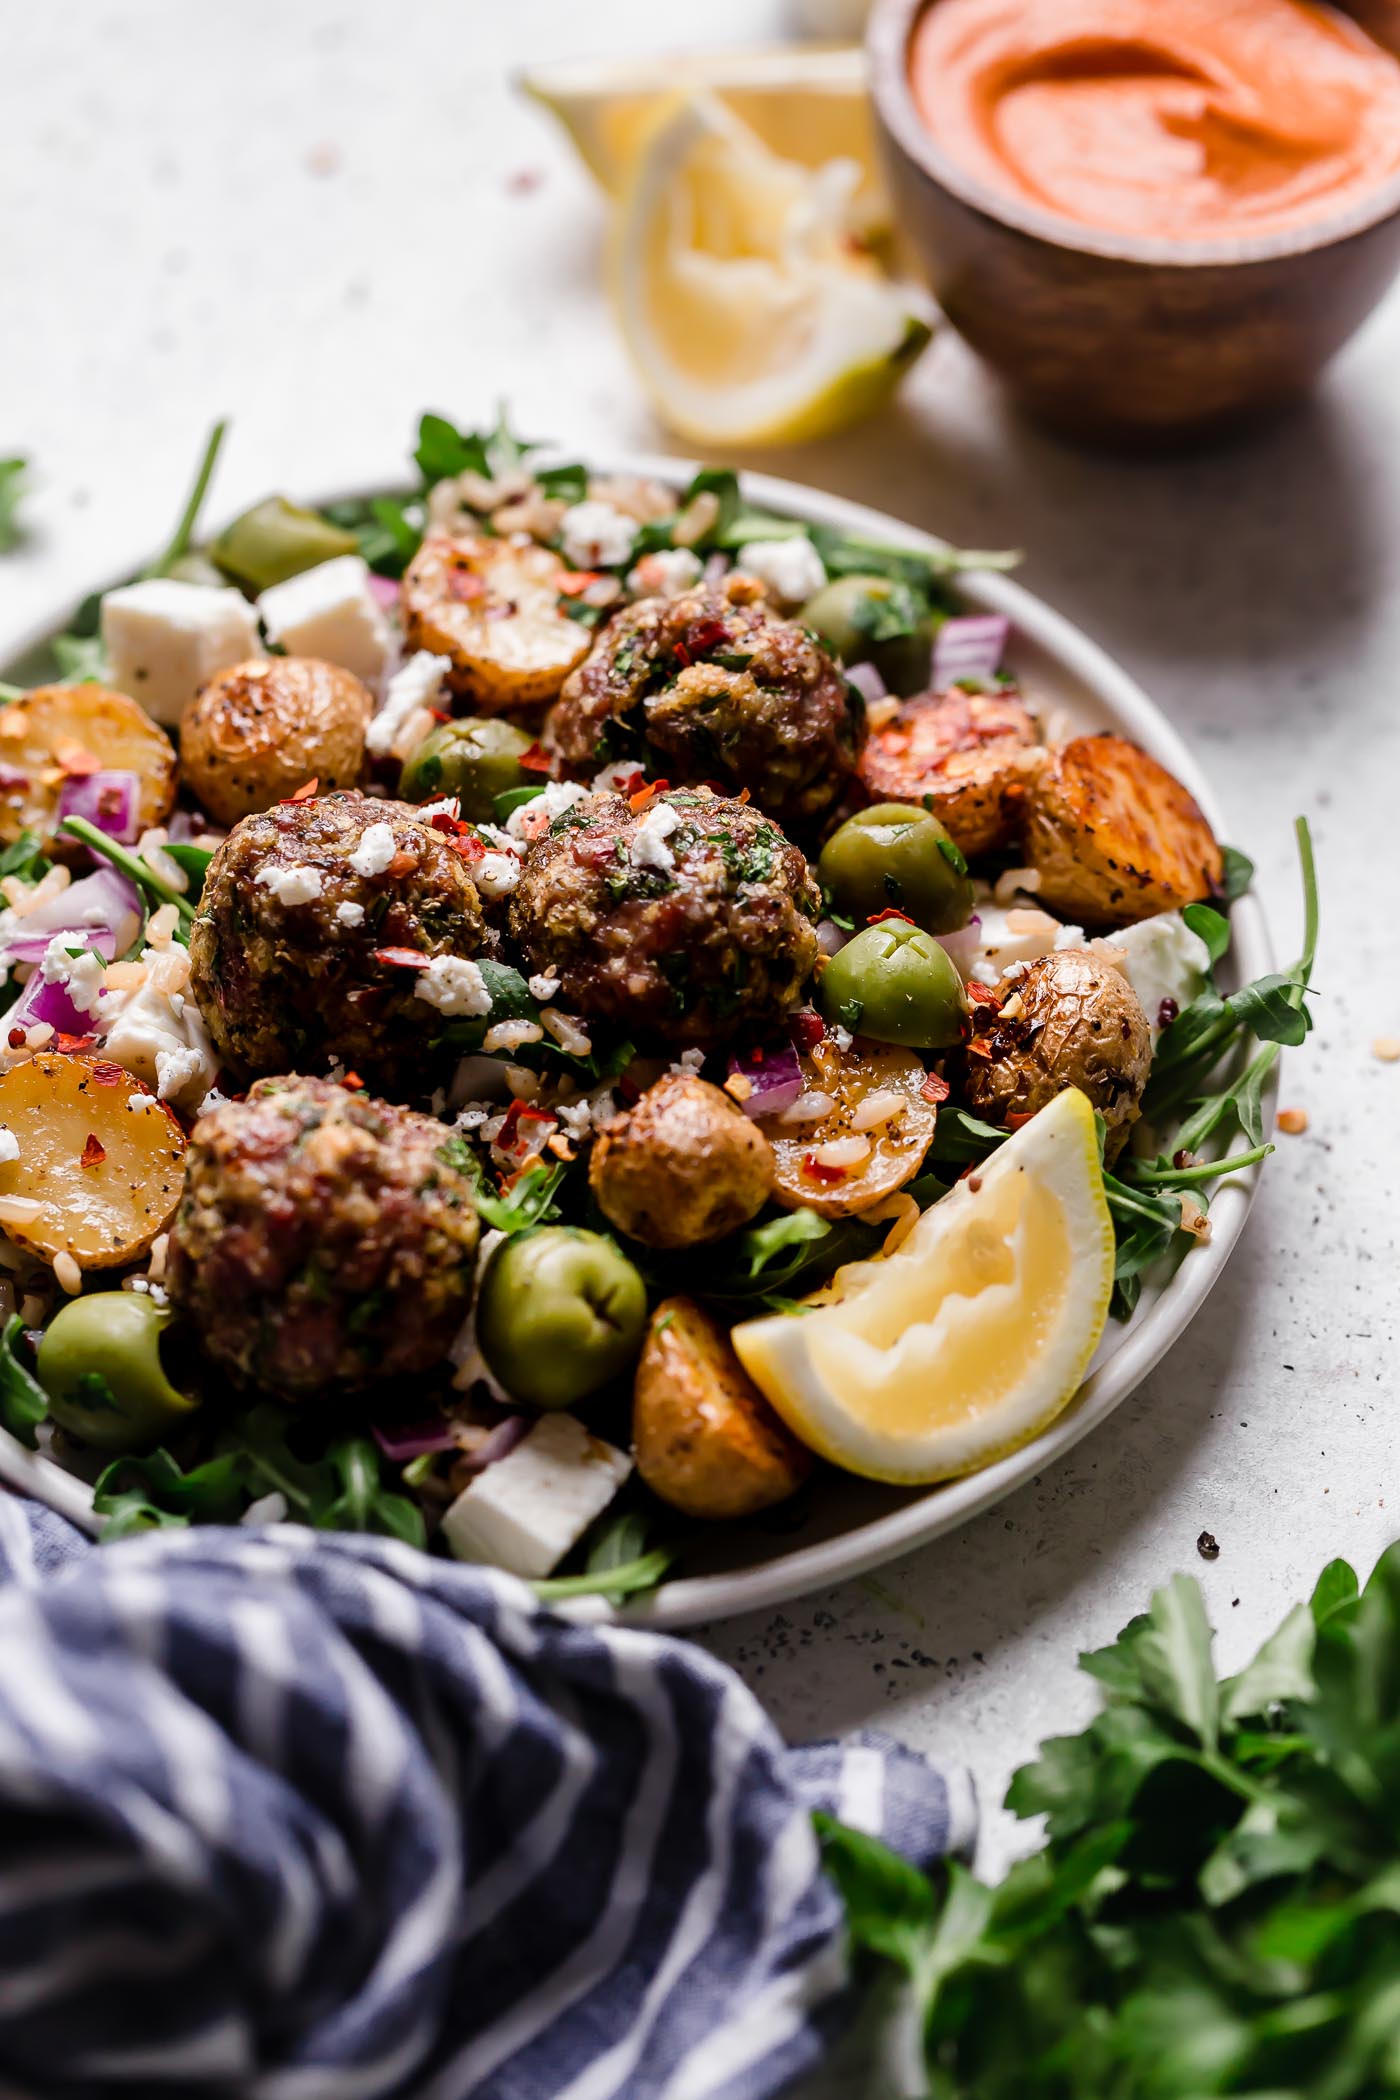 the easiest juicy & tender baked lamb meatballs, made with panko breadcrumbs, lemon, parsley, oregano & cumin, served on top of a seriously healthy meal prep bowl with lemony Greek roasted potatoes, greens, feta, olives, & homemade Romesco sauce. an easy & satisfying meal prep recipe for lunches all week long! #playswellwithbutter #lambmeatballs #bakedlambmeatballs #greeklambmeatballs #groundlamb #mealpreprecipes #mealpreprecipesfortheweek #mediterraneandiet #healthybowlsrecipe